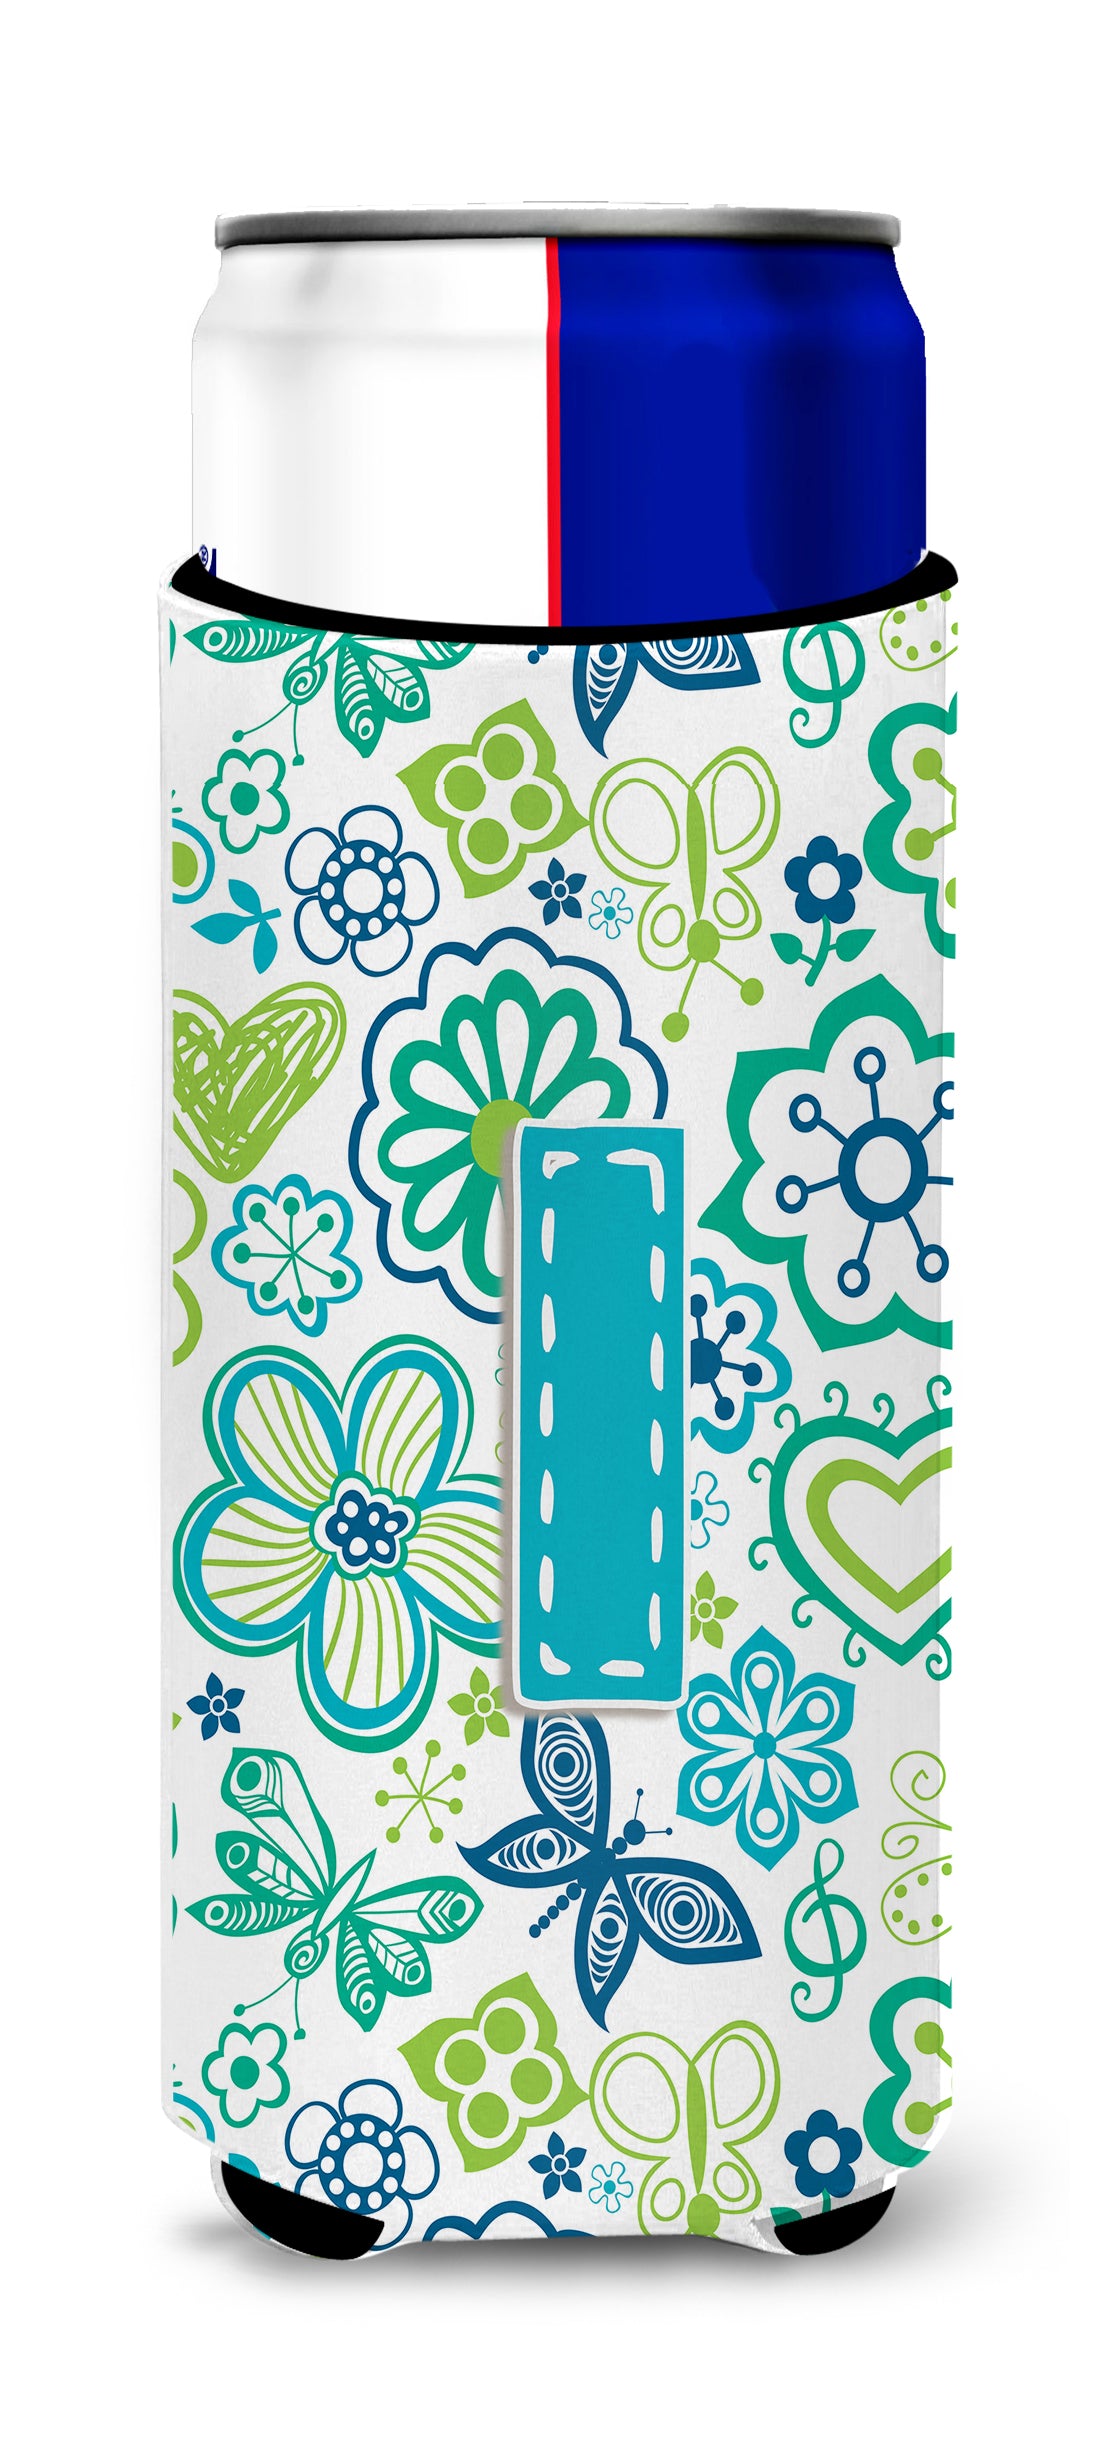 Letter I Flowers and Butterflies Teal Blue Ultra Beverage Insulators for slim cans CJ2006-IMUK